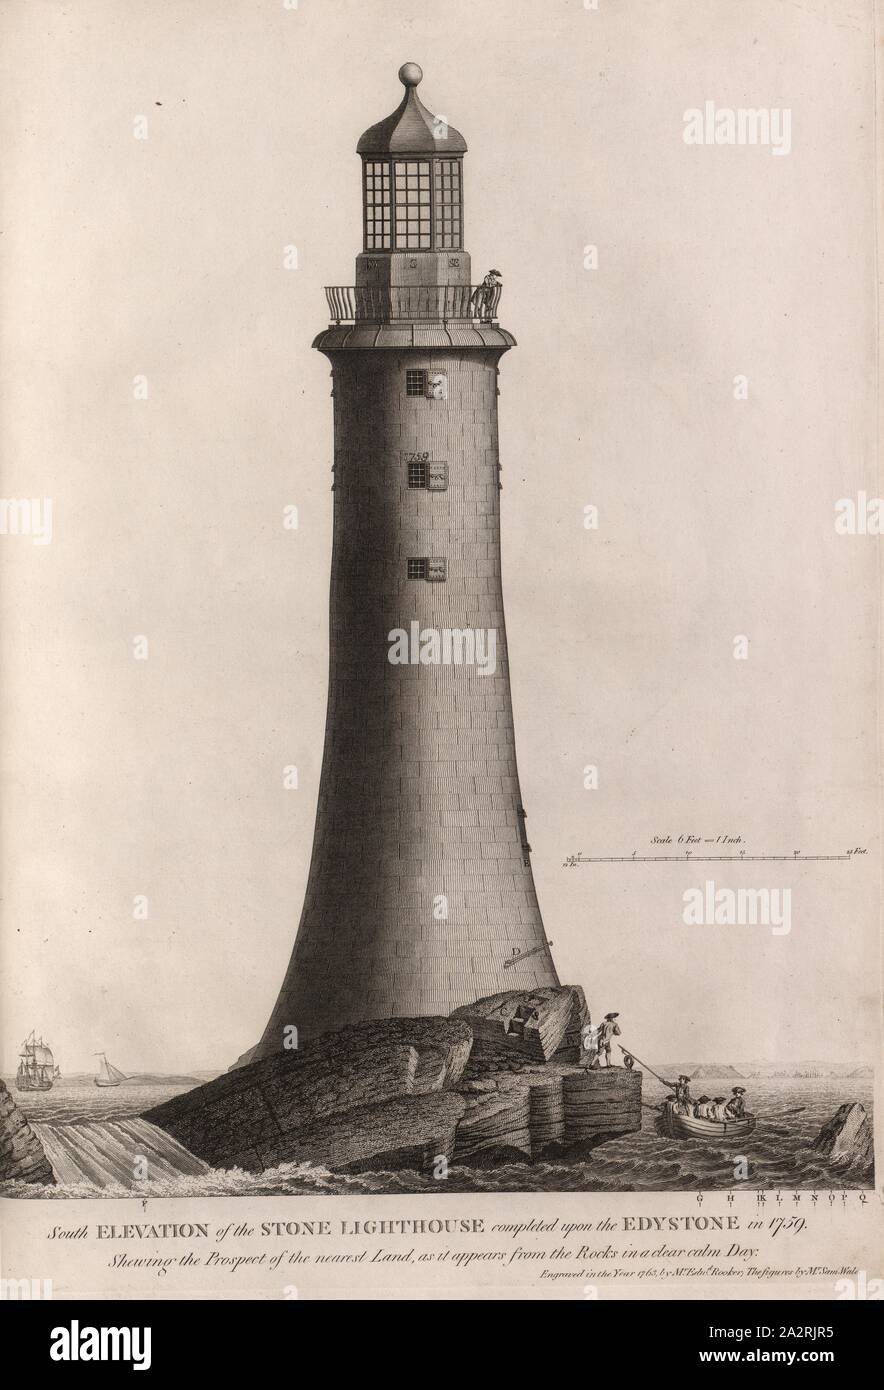 South Elevation of the Stone Lighthouse completed upon the Edystone in 1759 ..., Illustration of the Edystone lighthouse from the 18th century, signed: Engraved in the Year 1763 by Mr. Edwd., Rooker, The figures by Mr. Sam Wale, no. 8, after p. 198, Rooker, Edward (grav.); Wale, Sam, 1763, John Smeaton: A narrative of the building and a description of the construction of the Edystone lighthouse with stone: to which is subjoined, an appendix, giving some account of the lighthouse on the spurn point, built upon a sand. London: printed for the author by H. Hughs: sold by G. Nicol, 1791 Stock Photo